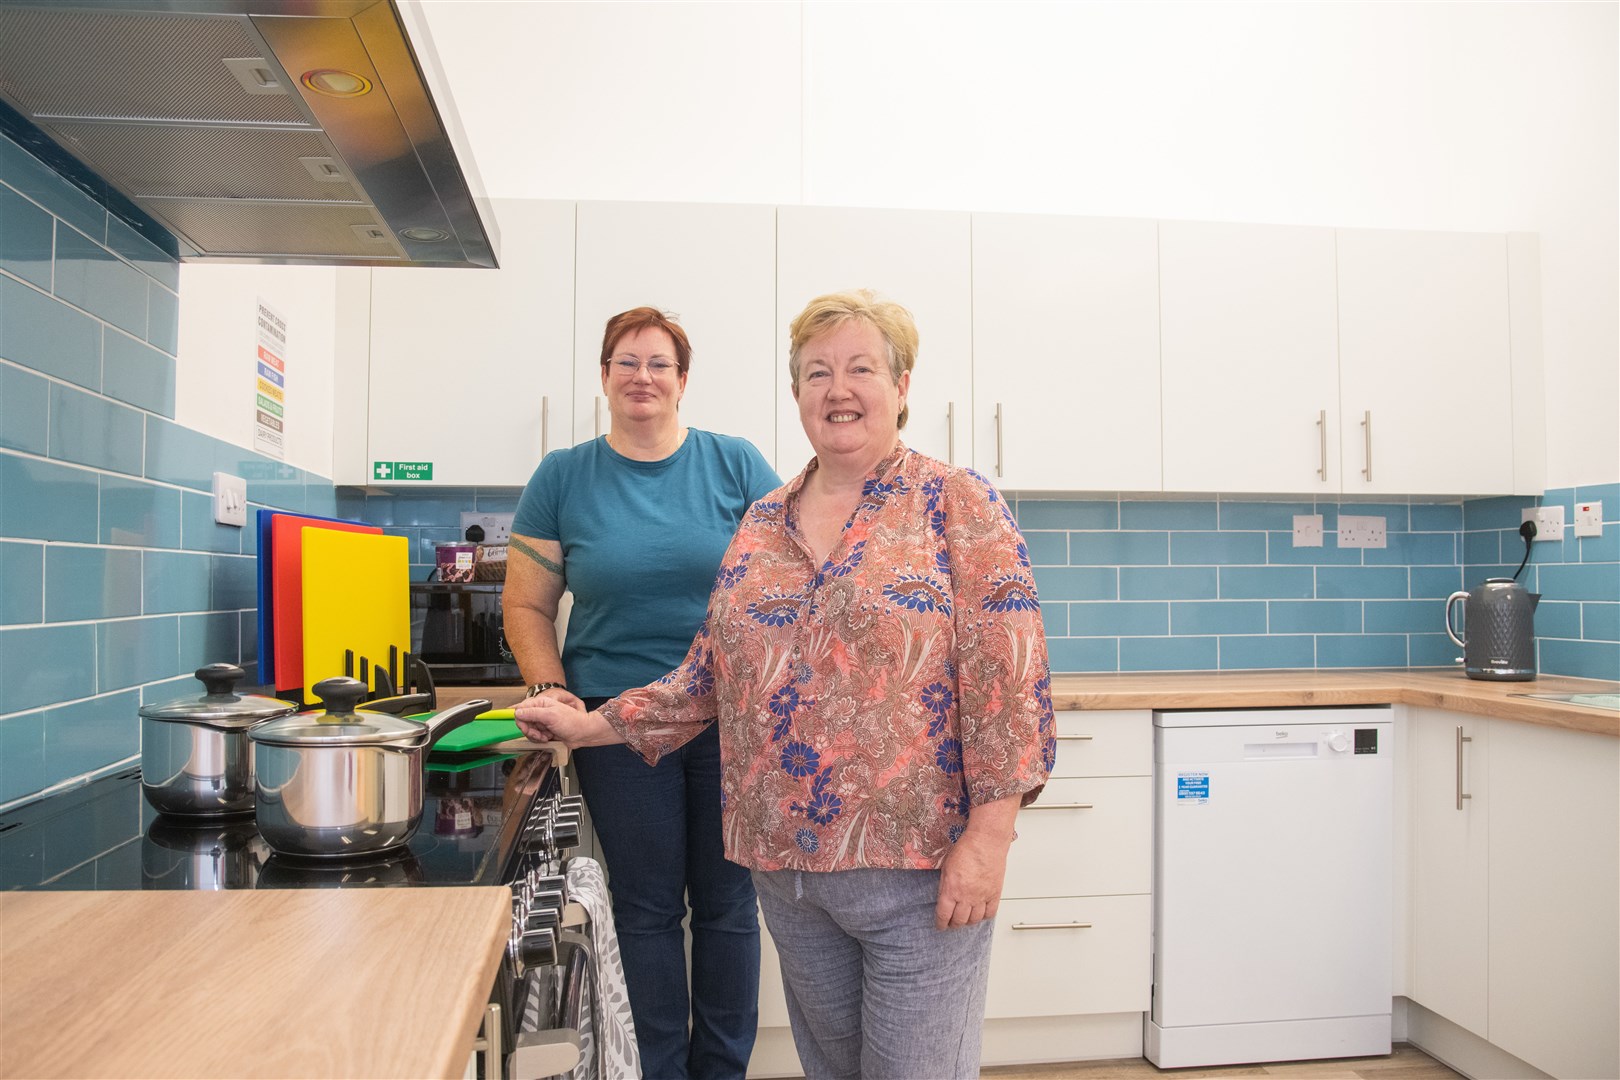 Community workers Sharon Whiteley (left) and Sandra Kennedy (right). Picture: Daniel Forsyth